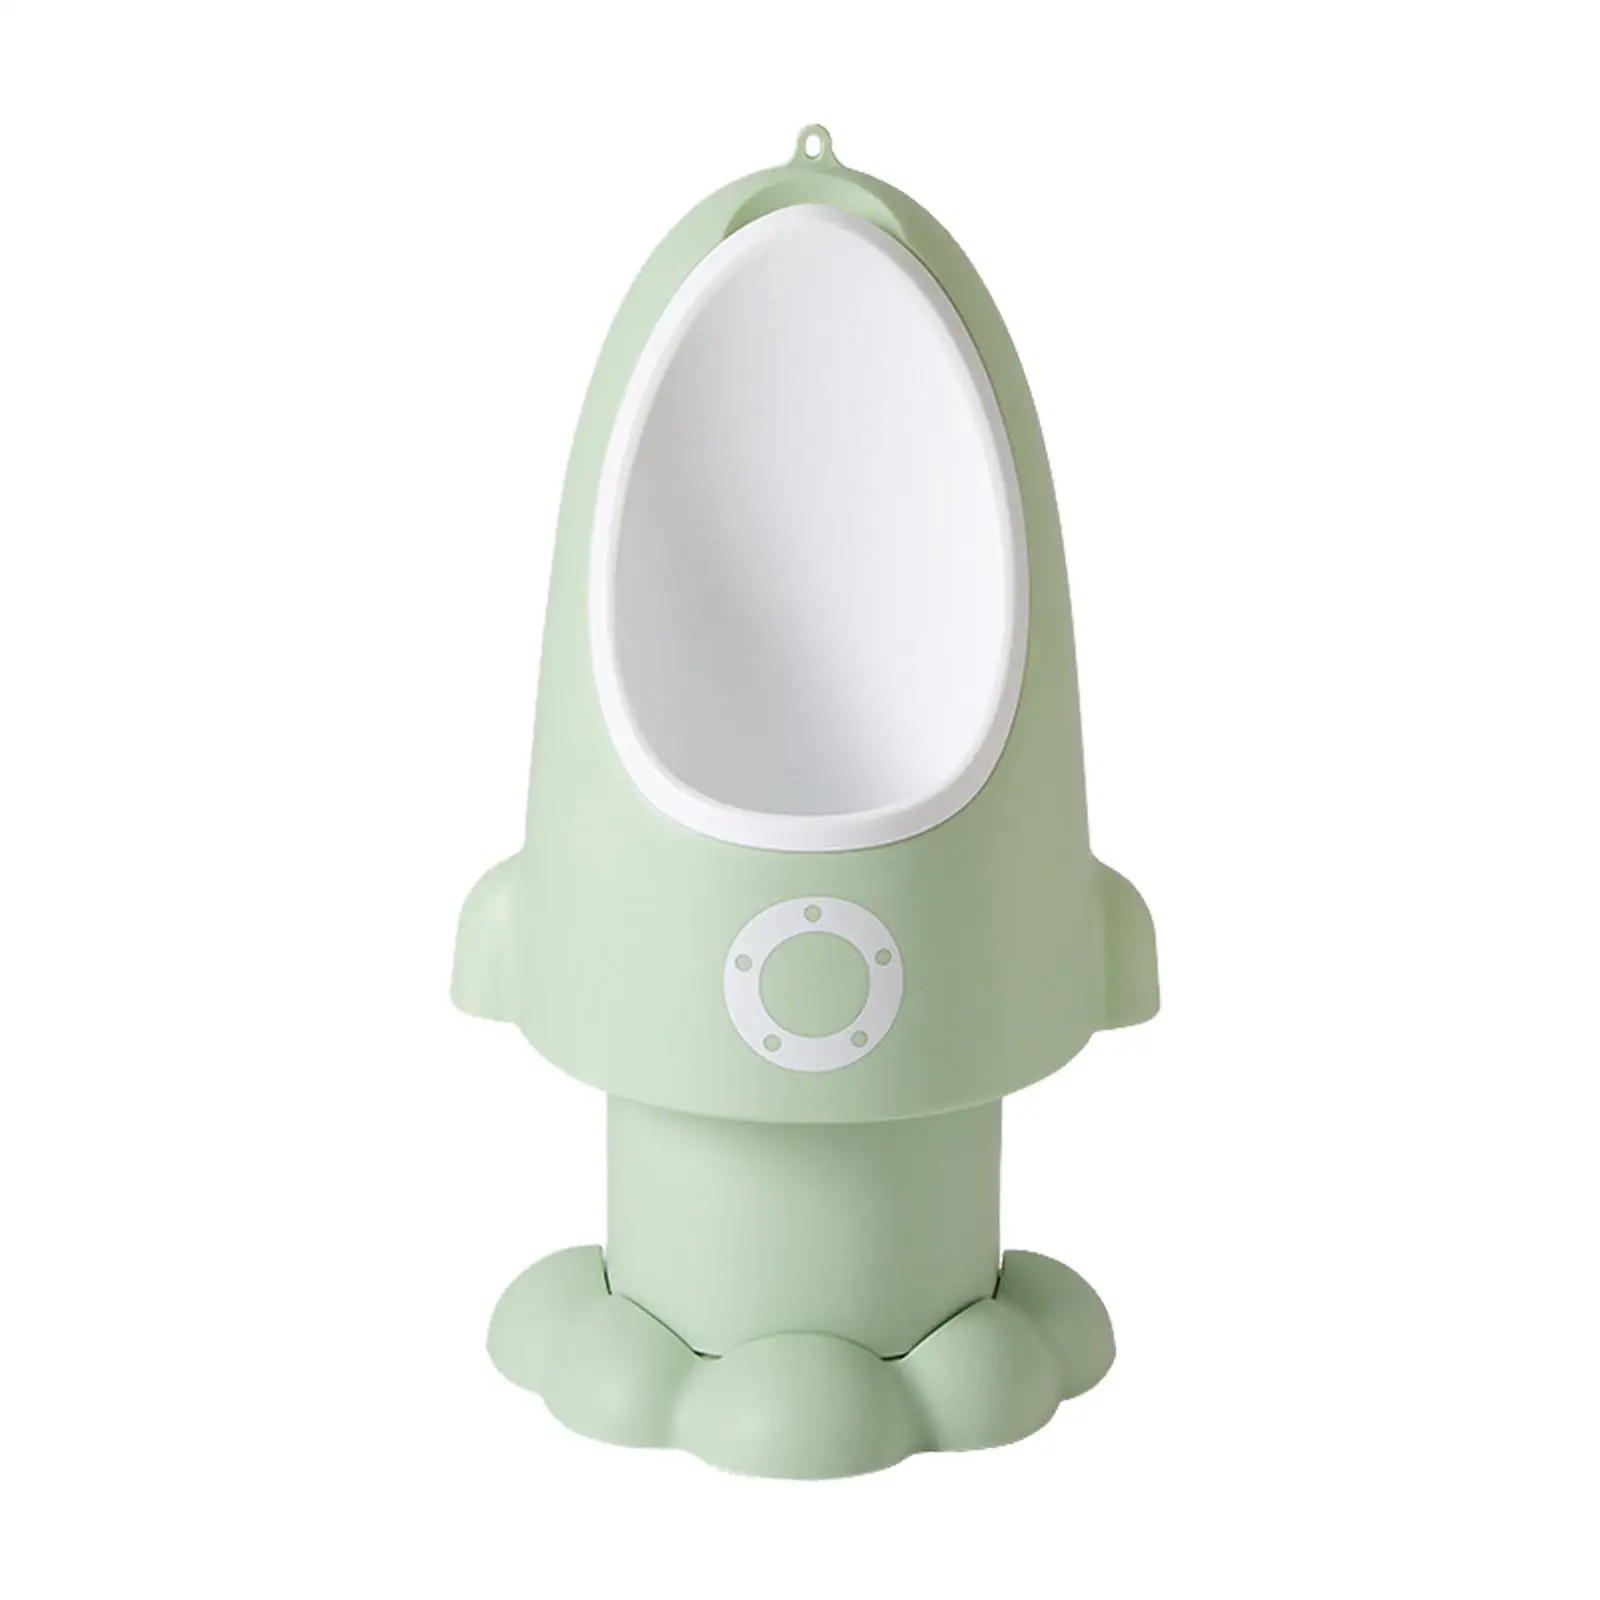 Rocket Shape Child Potty Urinal Toilet Pee Trainer Pee Training Urinal Trainer Adjustable Height for Kids Toddler Boys Baby